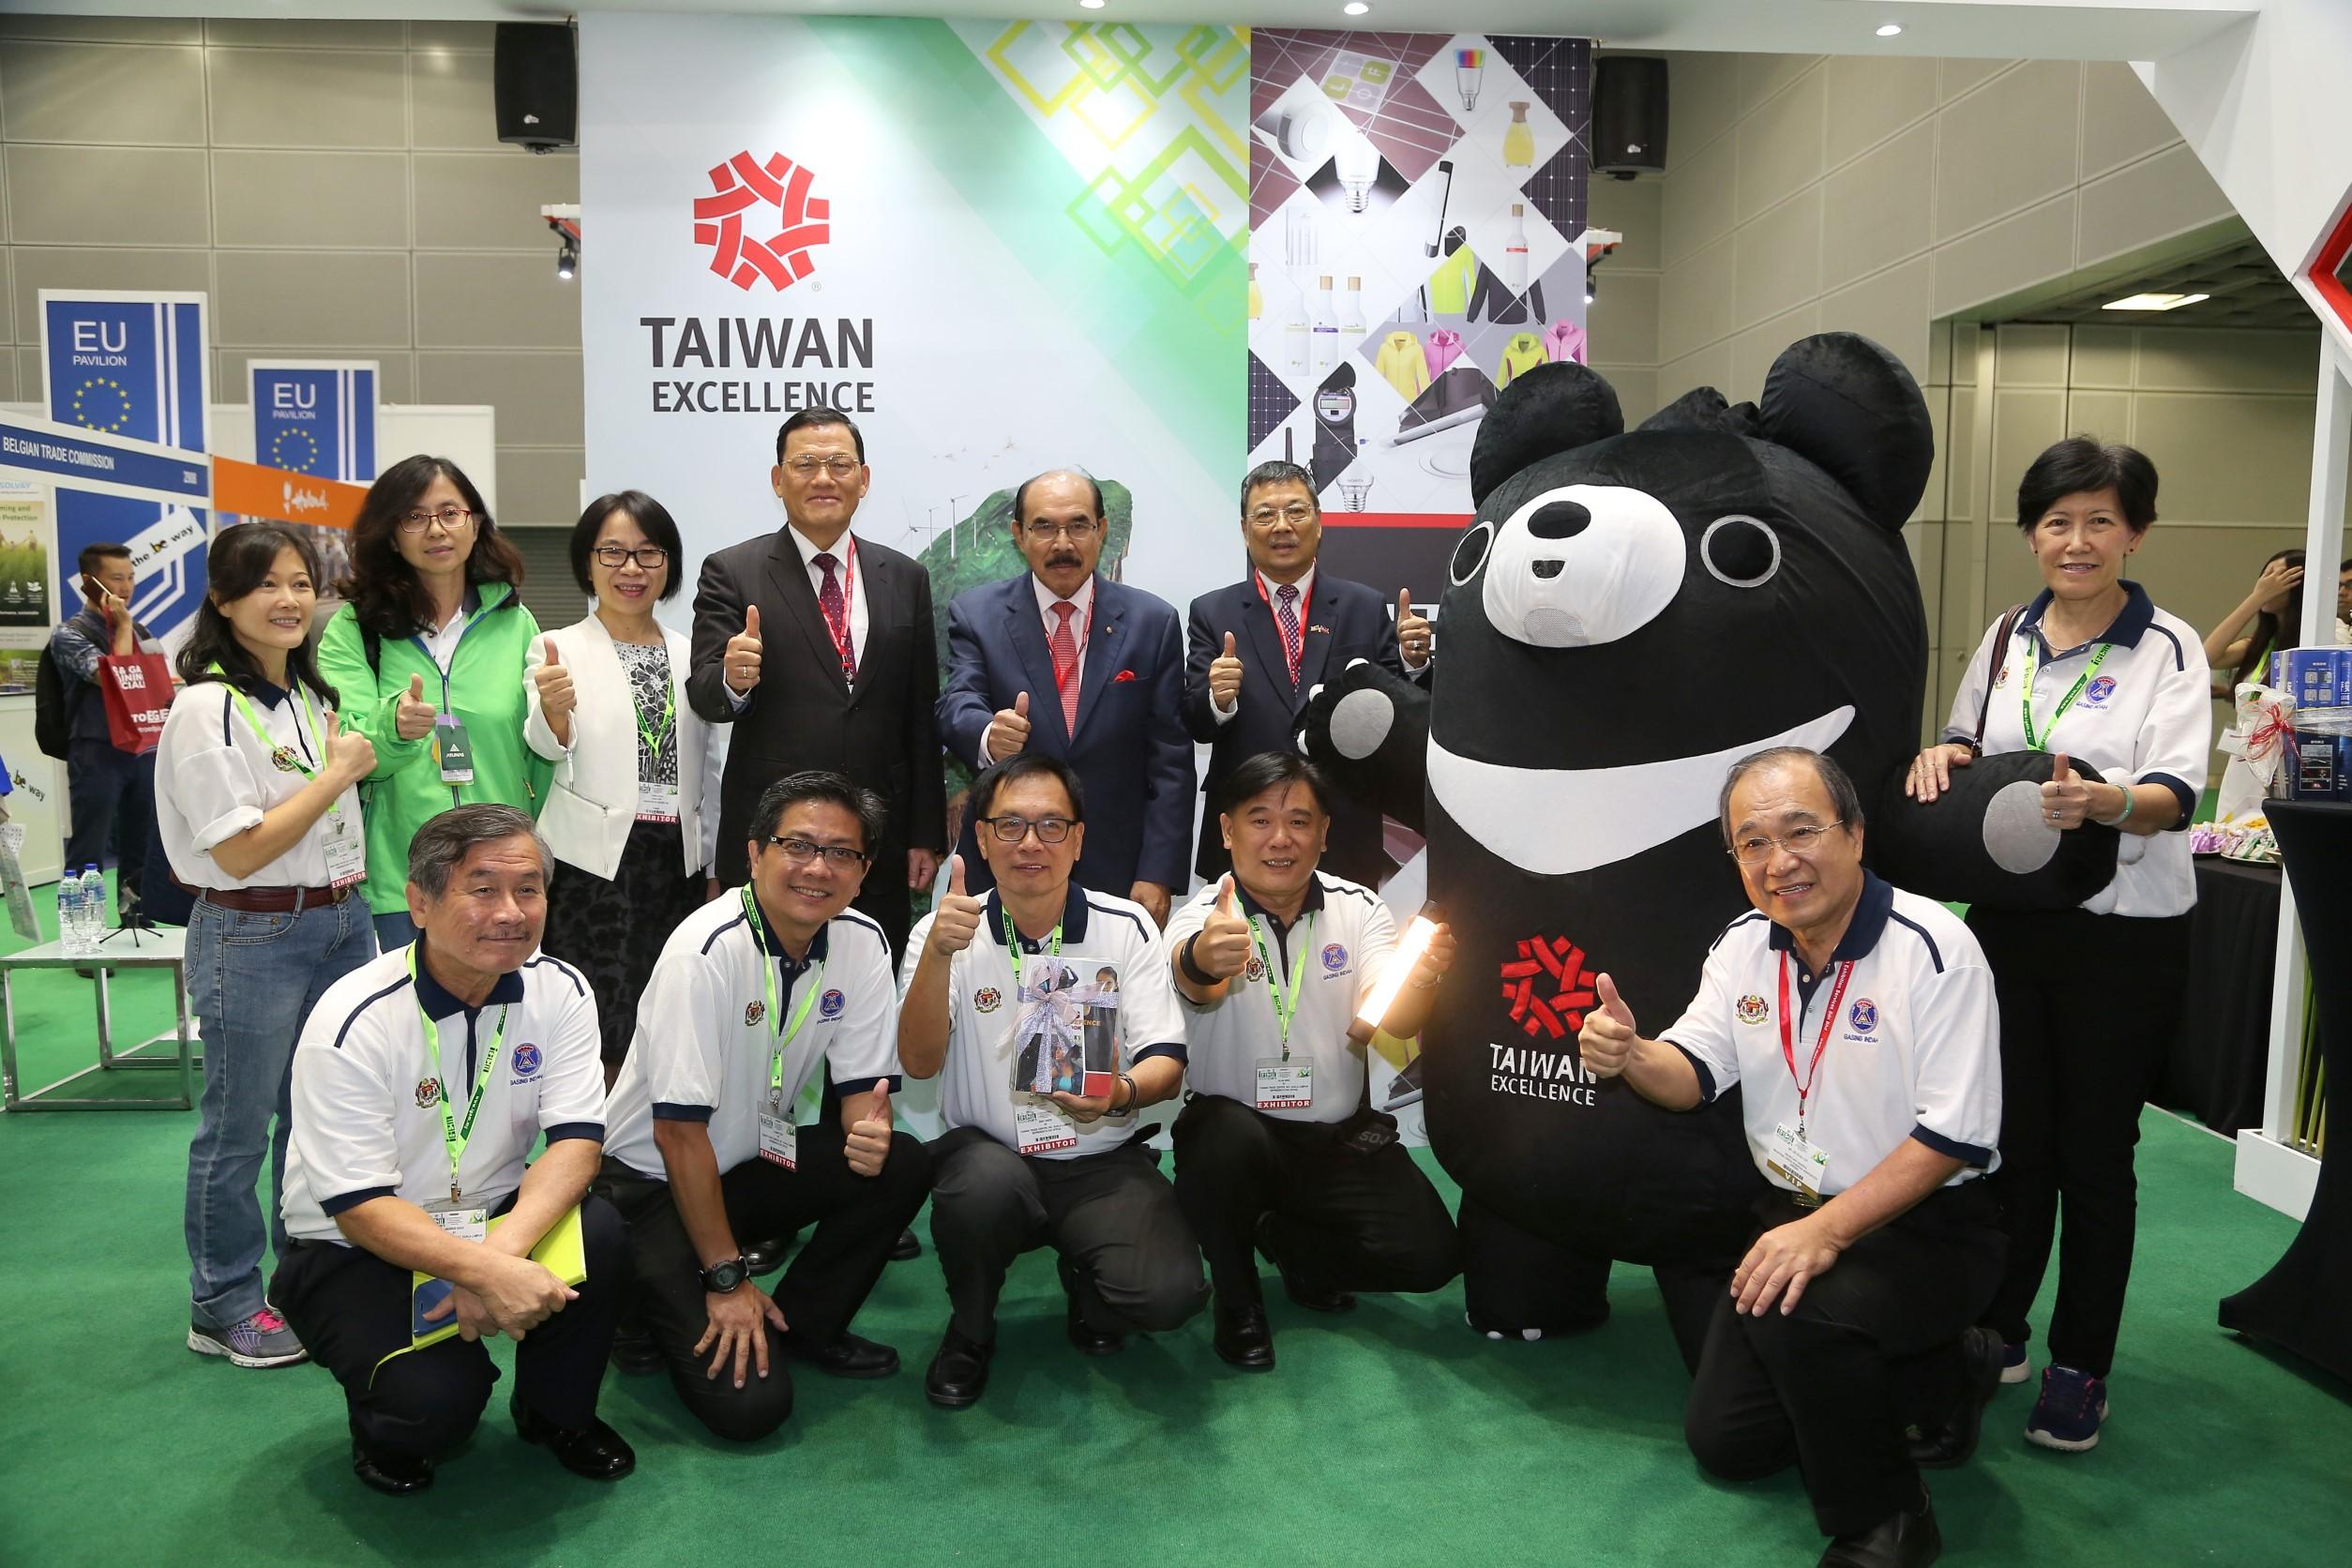 Representative Chang, James Chi-ping (5th from left) attends the Taiwan Excellence Pavilion at IGEM 2017 on October 11, 2017.
